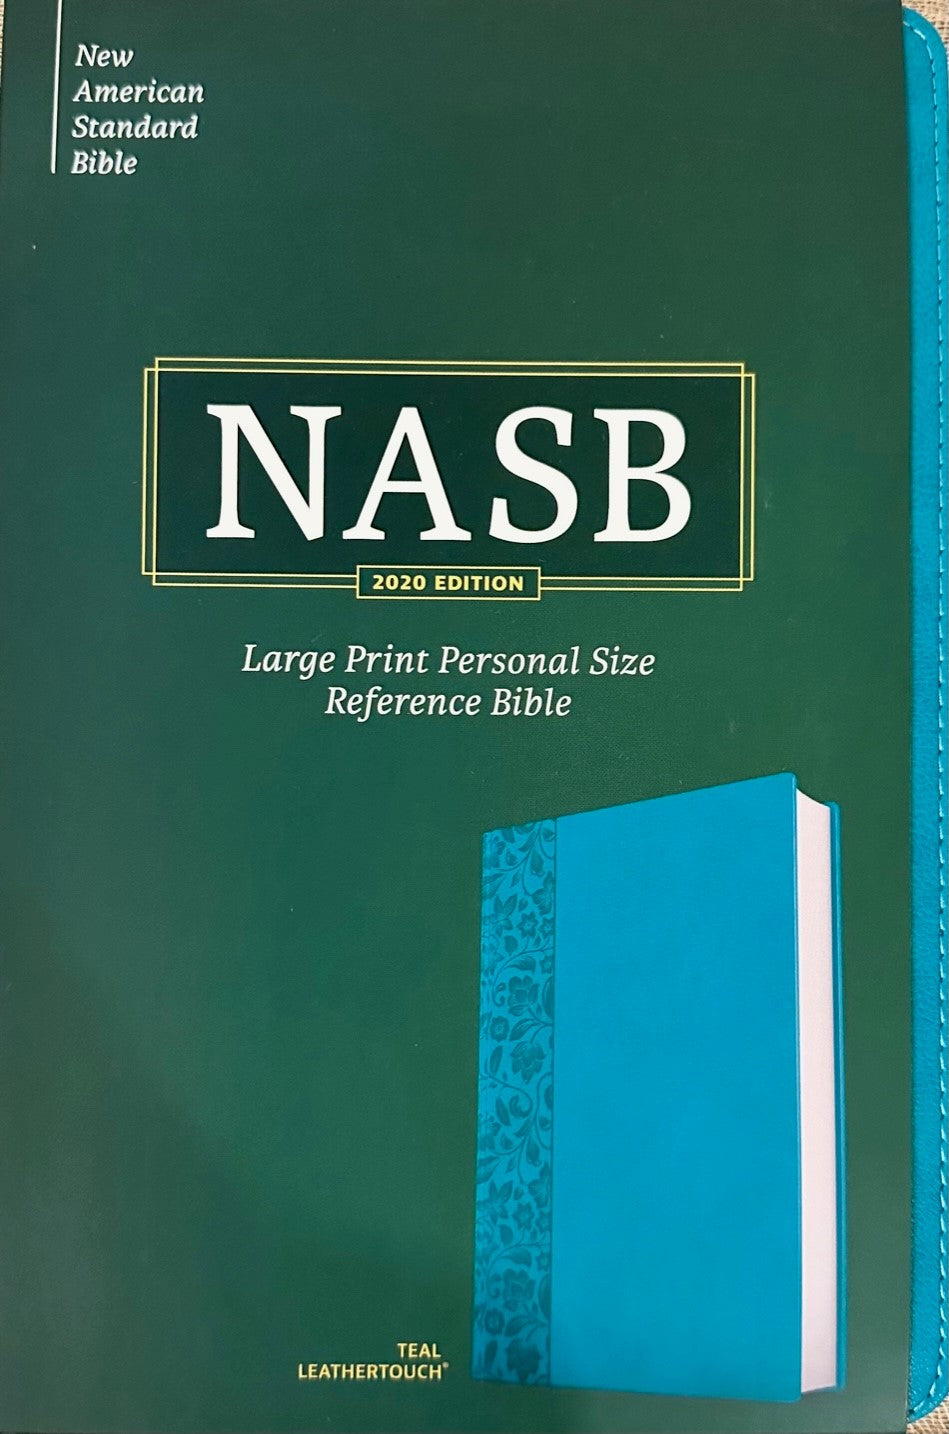 NASB 2020 Large Print Personal Size Reference Bible - Teal Leathertouch